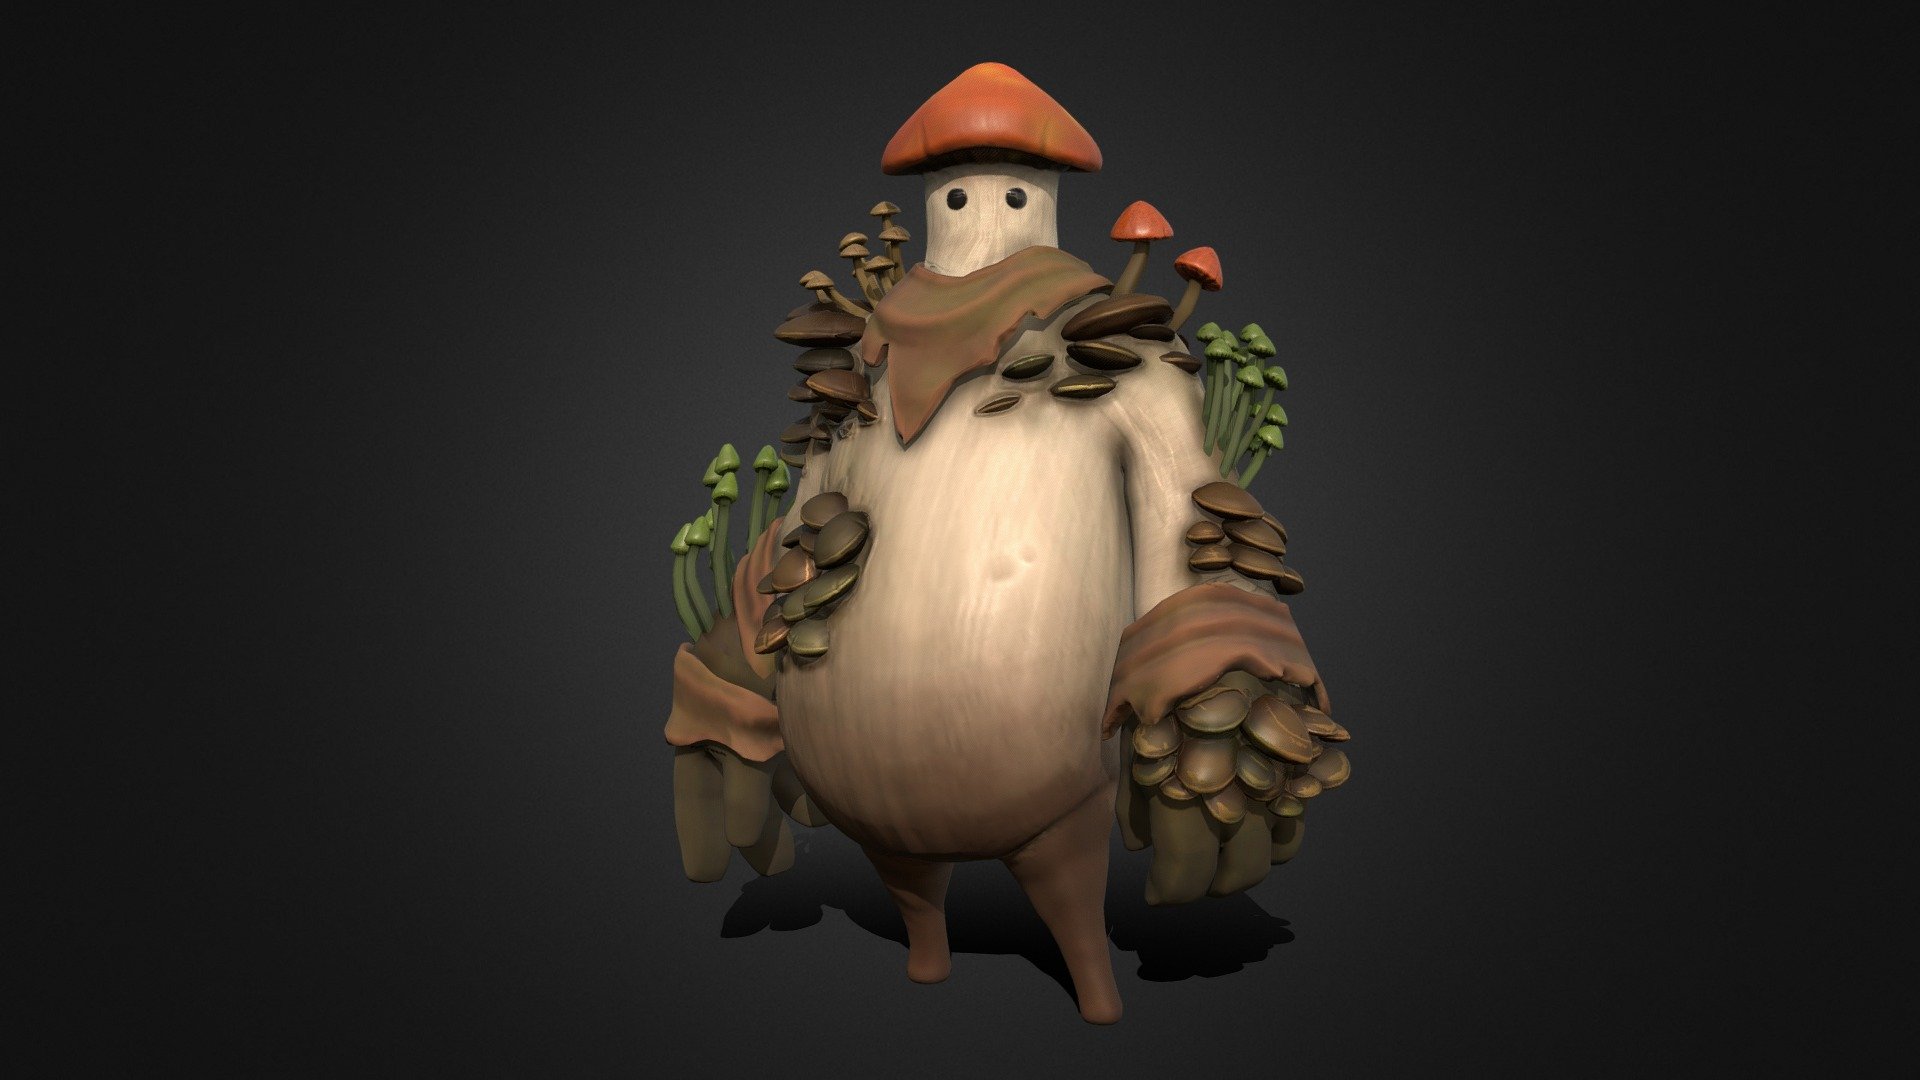 Mushroom humanoid concept created by BABAGANOOSH99 

Models, textures and sculpt created by me.
Thank you so much to Welly Chang and the FlippedNormals community for offering feedback.

65K Tris
2 Textures, 2048x2048 - Truffle Man - Download Free 3D model by dotflare 3d model